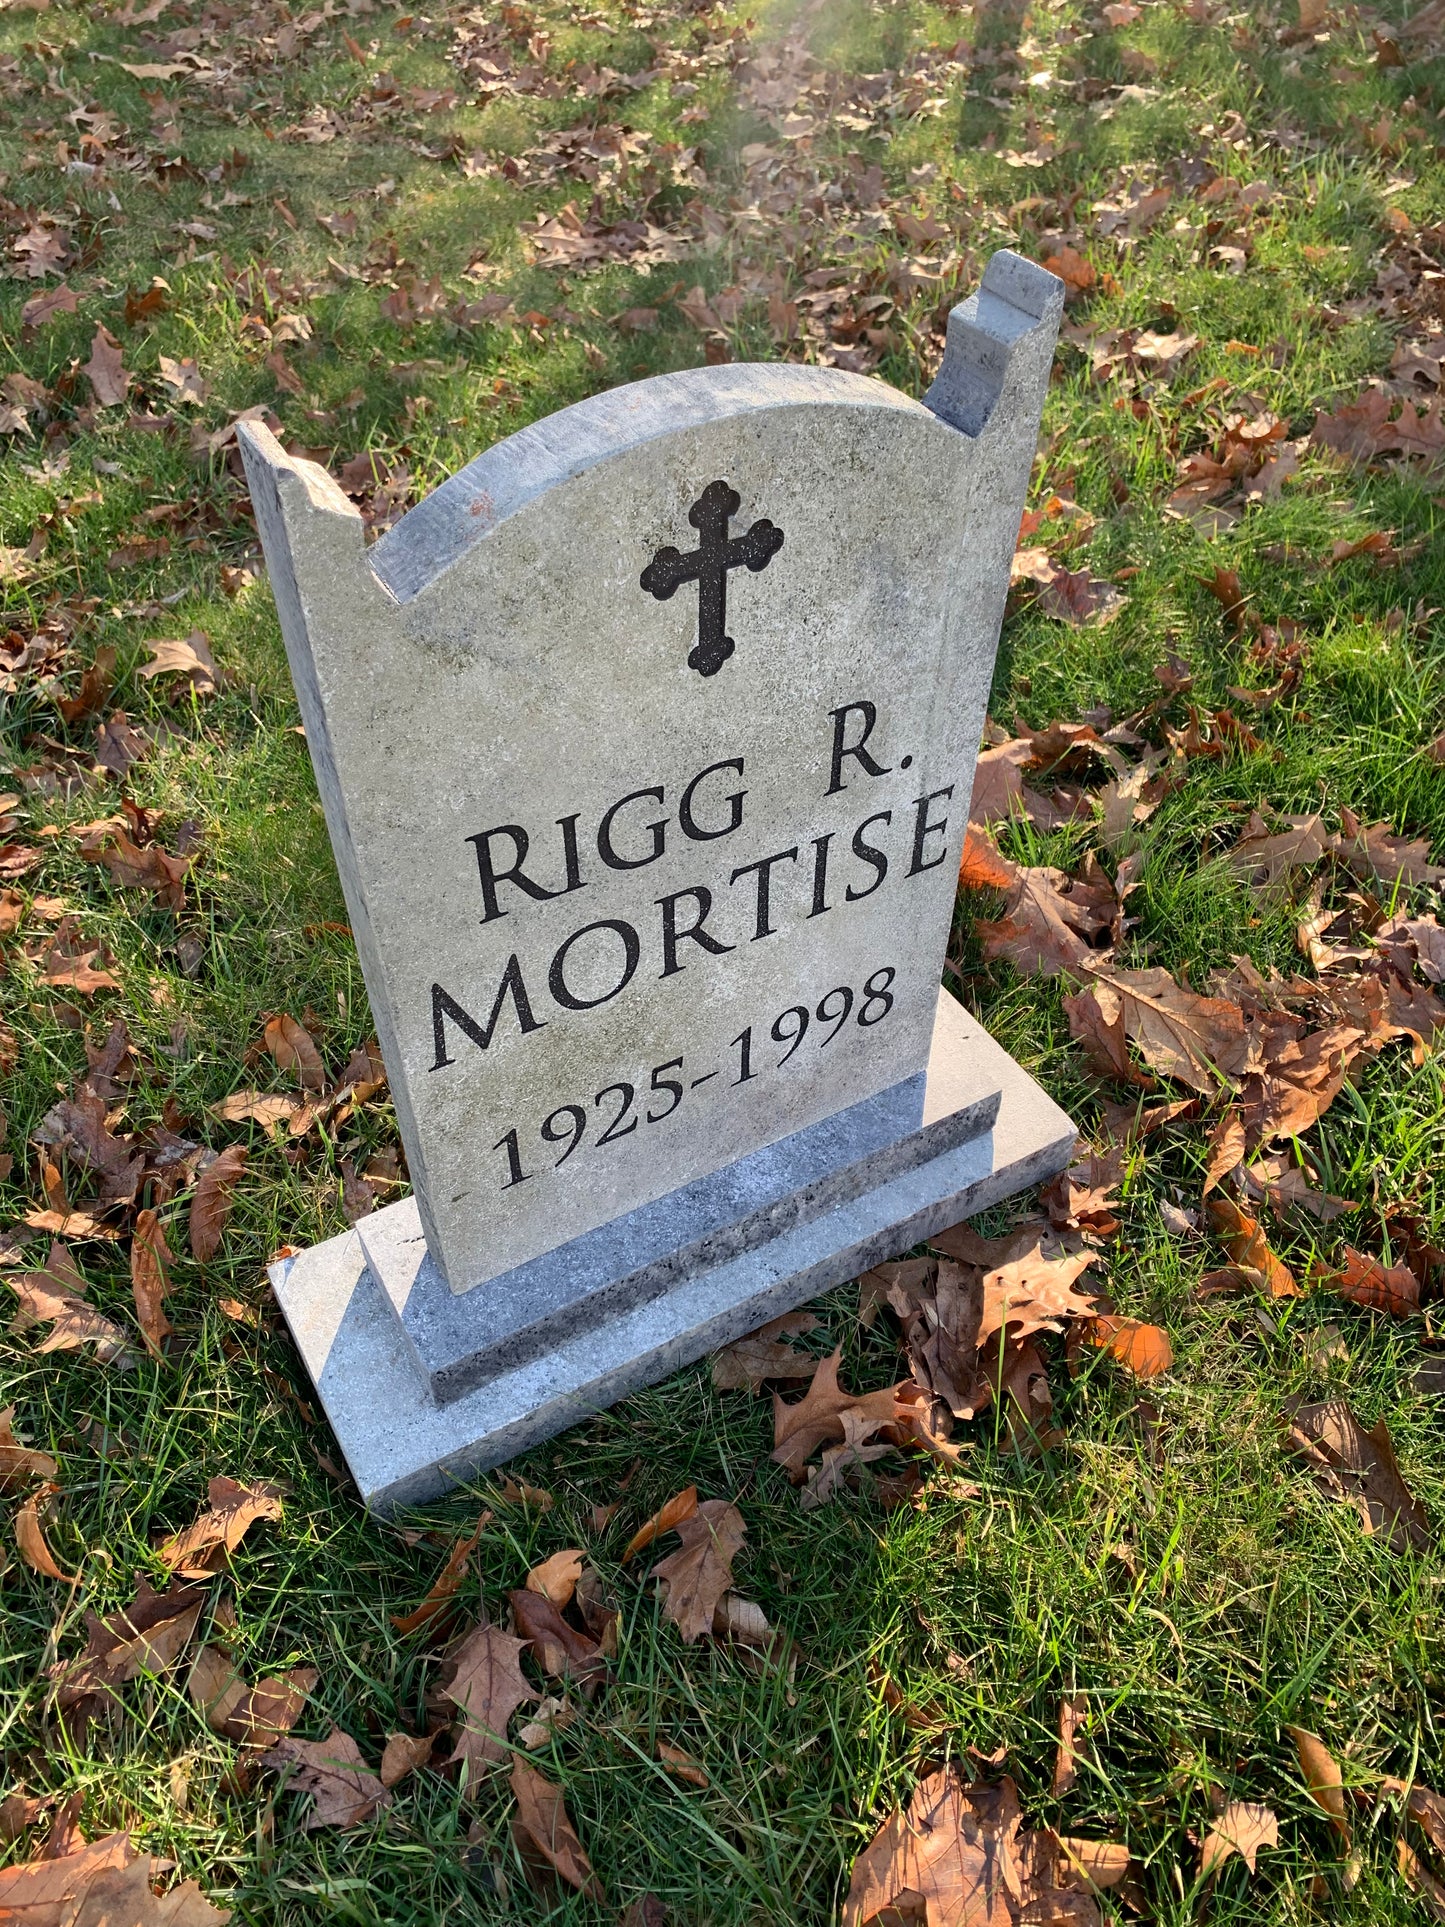 Rigg R. Mortise Tombstone